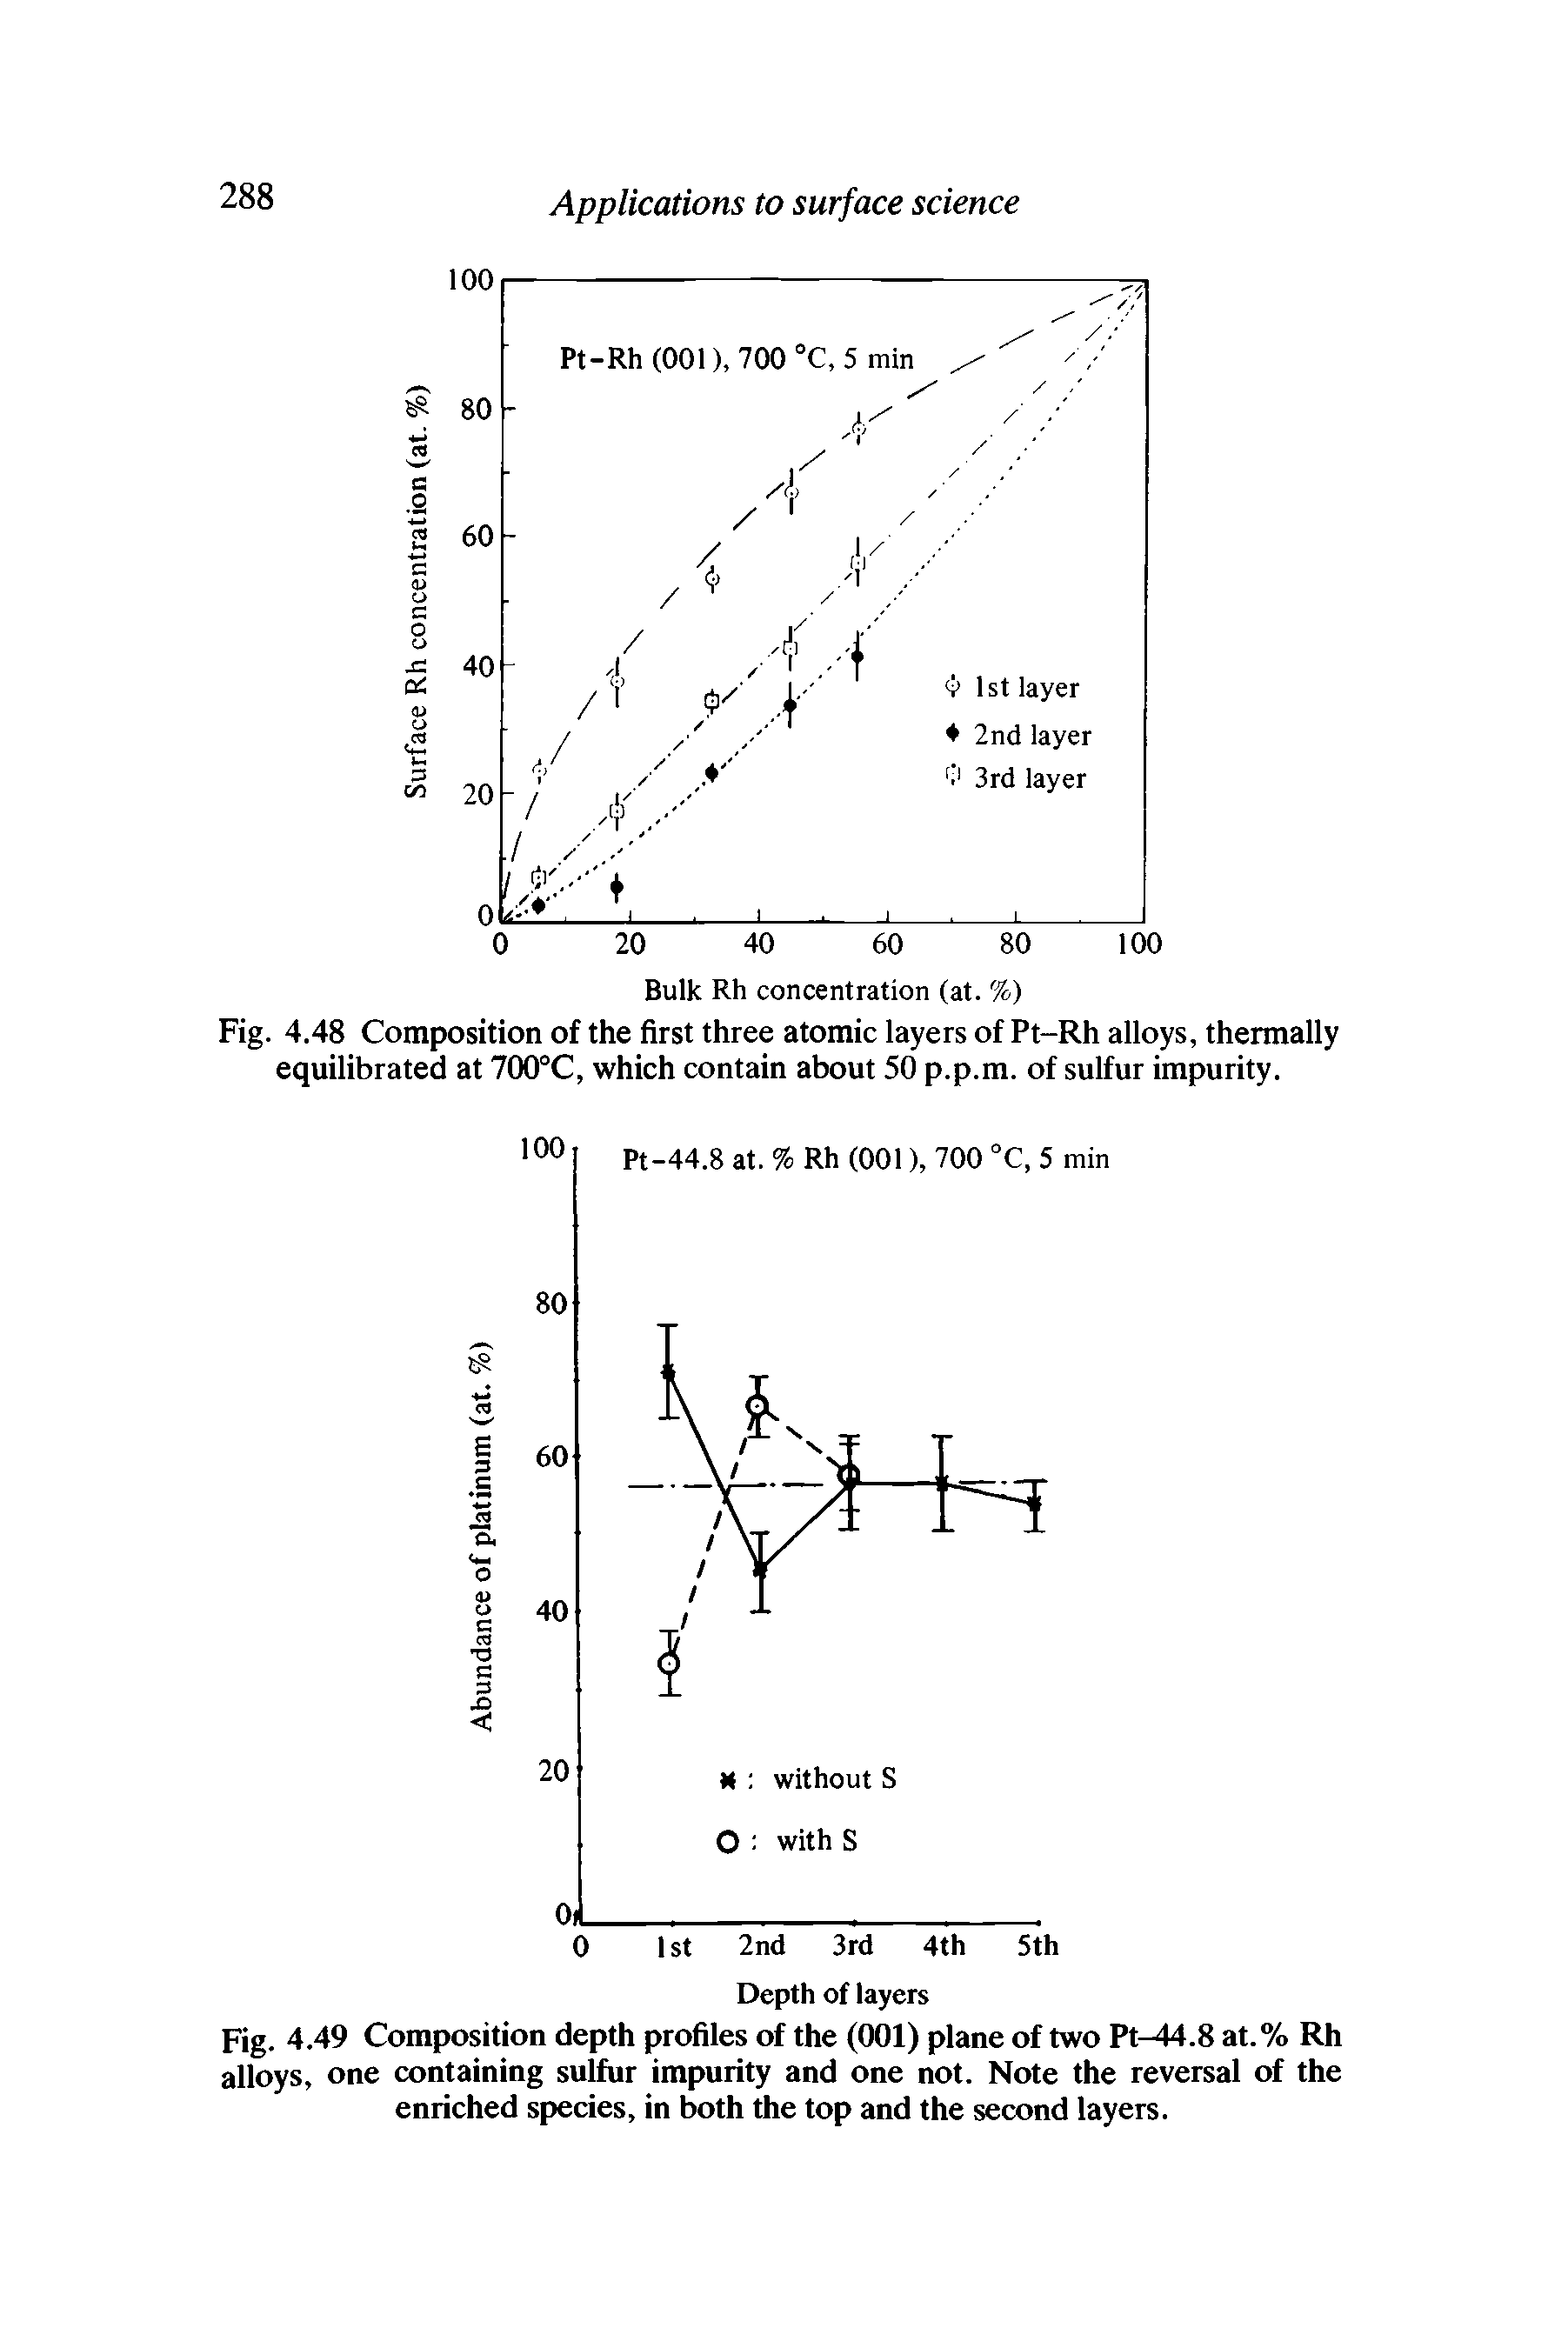 Fig. 4.48 Composition of the first three atomic layers of Pt-Rh alloys, thermally equilibrated at 700°C, which contain about 50 p.p.m. of sulfur impurity.